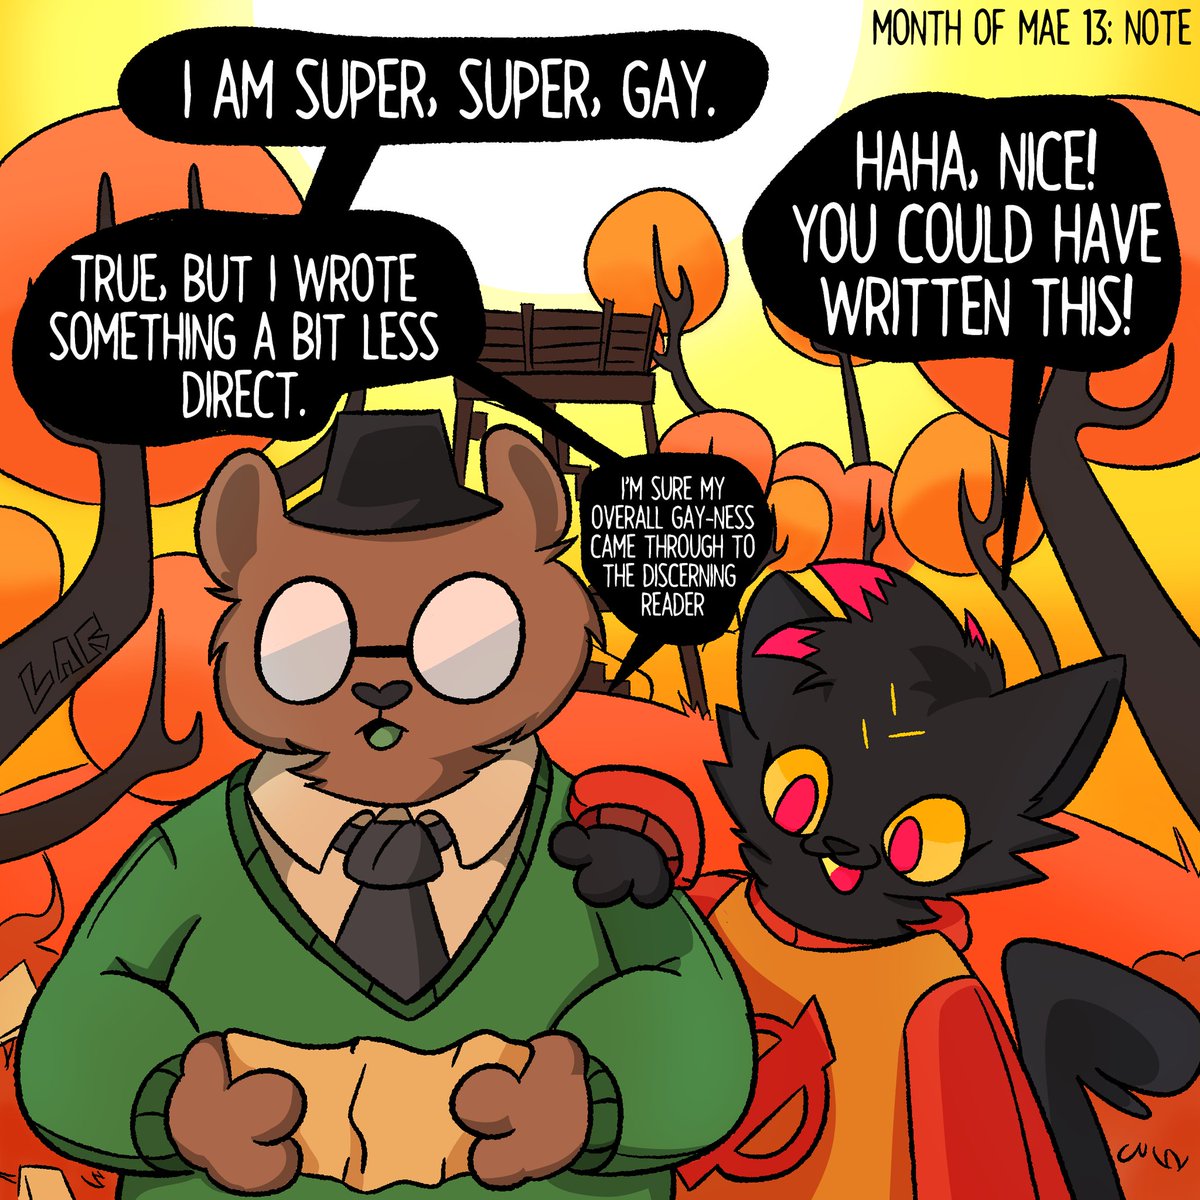 #MonthofMae2024 Day 13: Note! 🗒️

I'm sure my overall gay-ness came through to the discerning reader.

#monthofmae #nightinthewoods #nitw